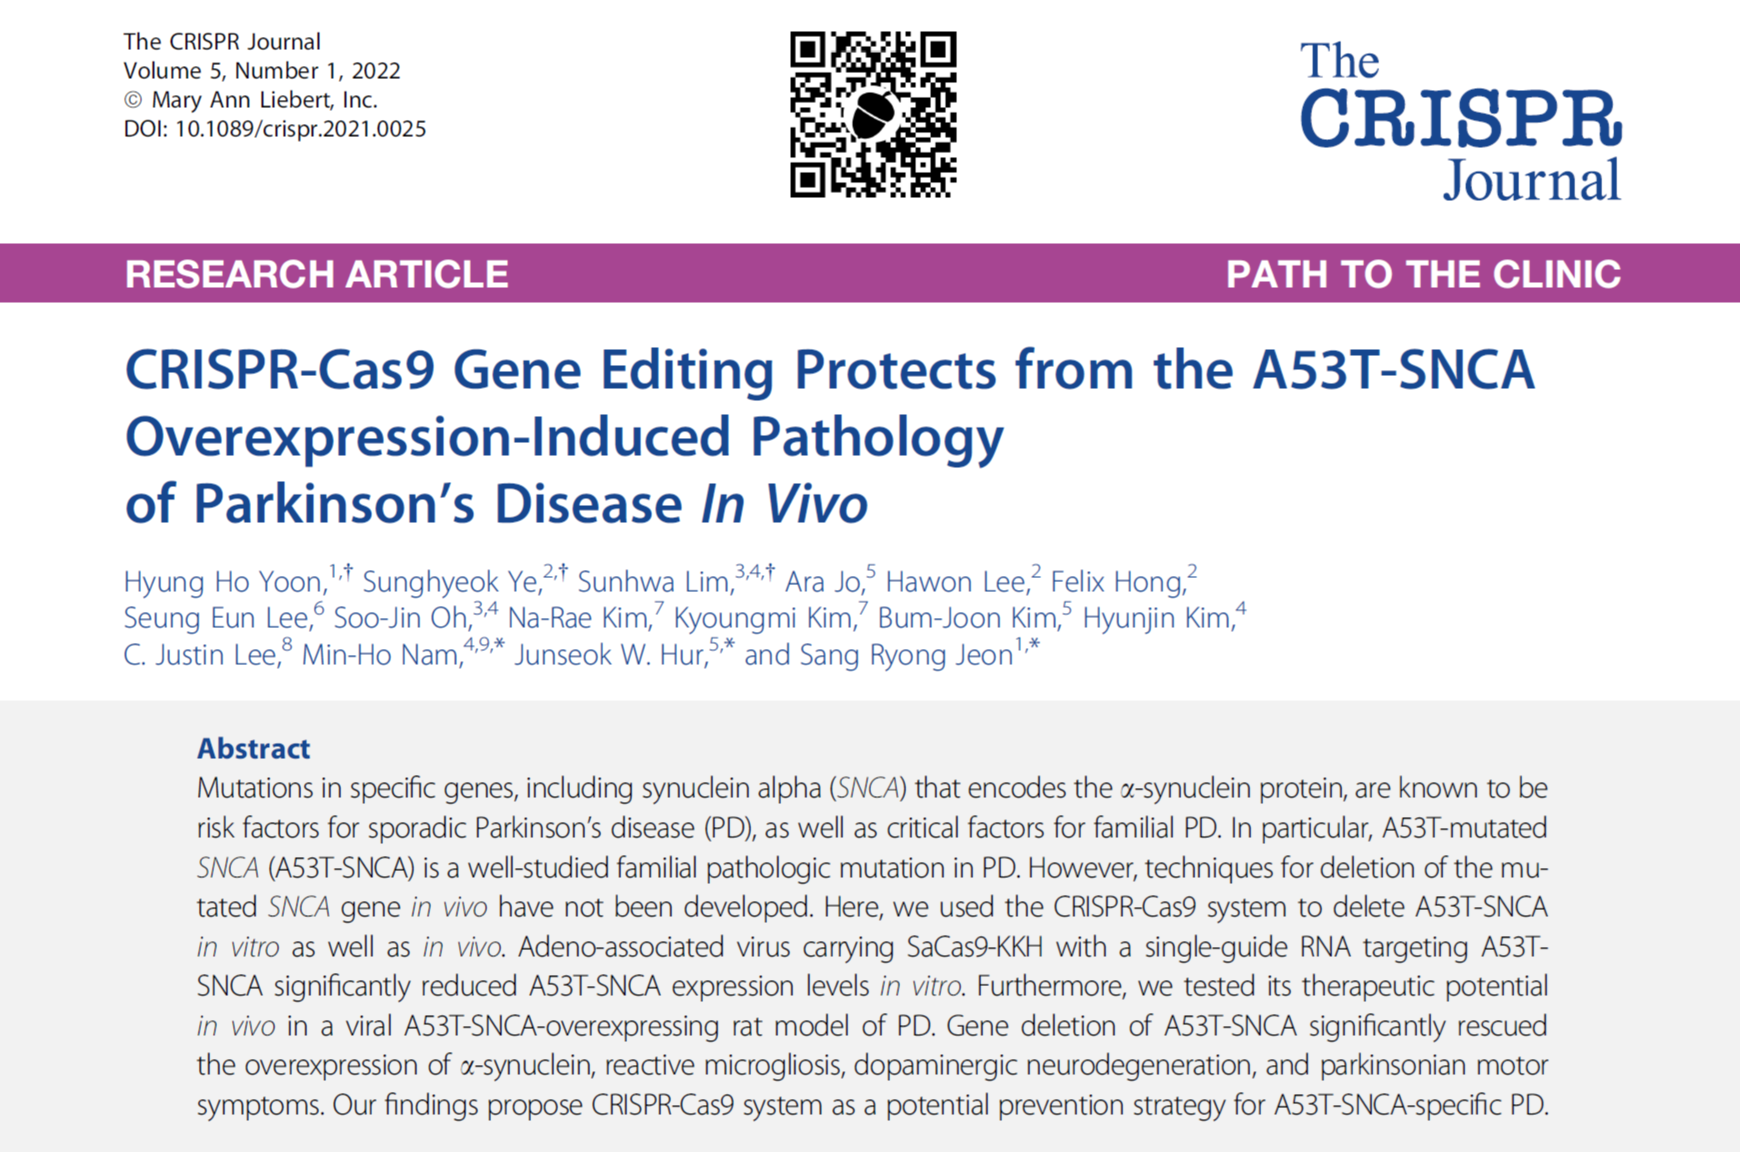 Our new manuscript is published on The Crispr Journal!